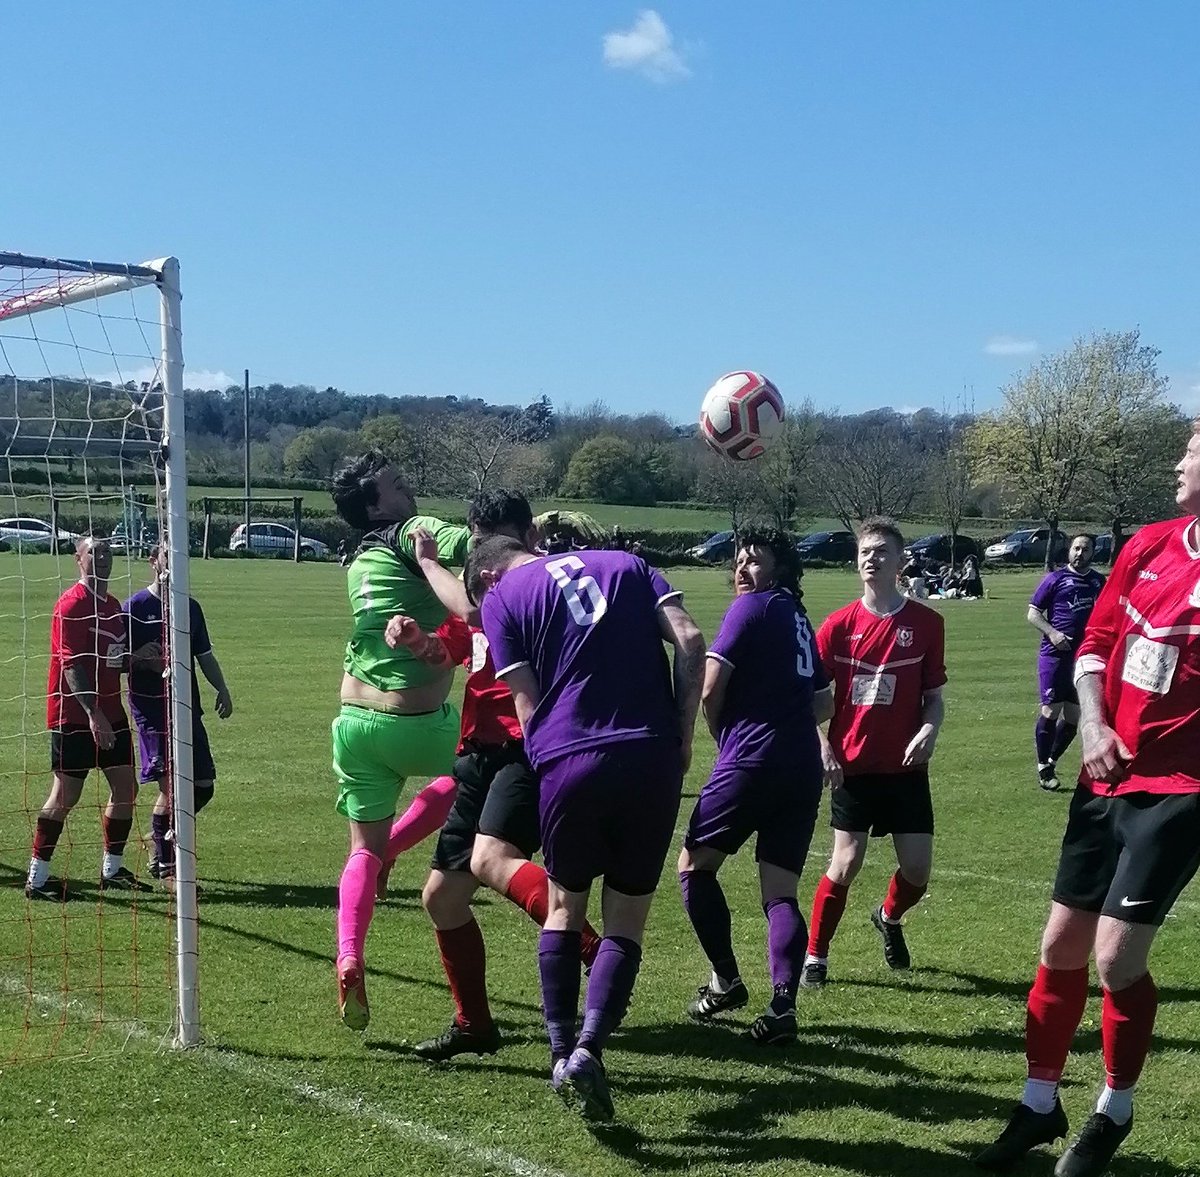 Charmouth 3 Forton Rangers Reserves 4
20/04/2024
Perry Street & District League division one
Refreshments - pasty & coffee from bakery outside the ground
Attendance 29 h/c

BARRS LANE, CHARMOUTH, BRIDPORT, Dorset DT6 6PS
@NonLeagueCrowd @footballtrav
@markjones45sw
@nl_awaydays